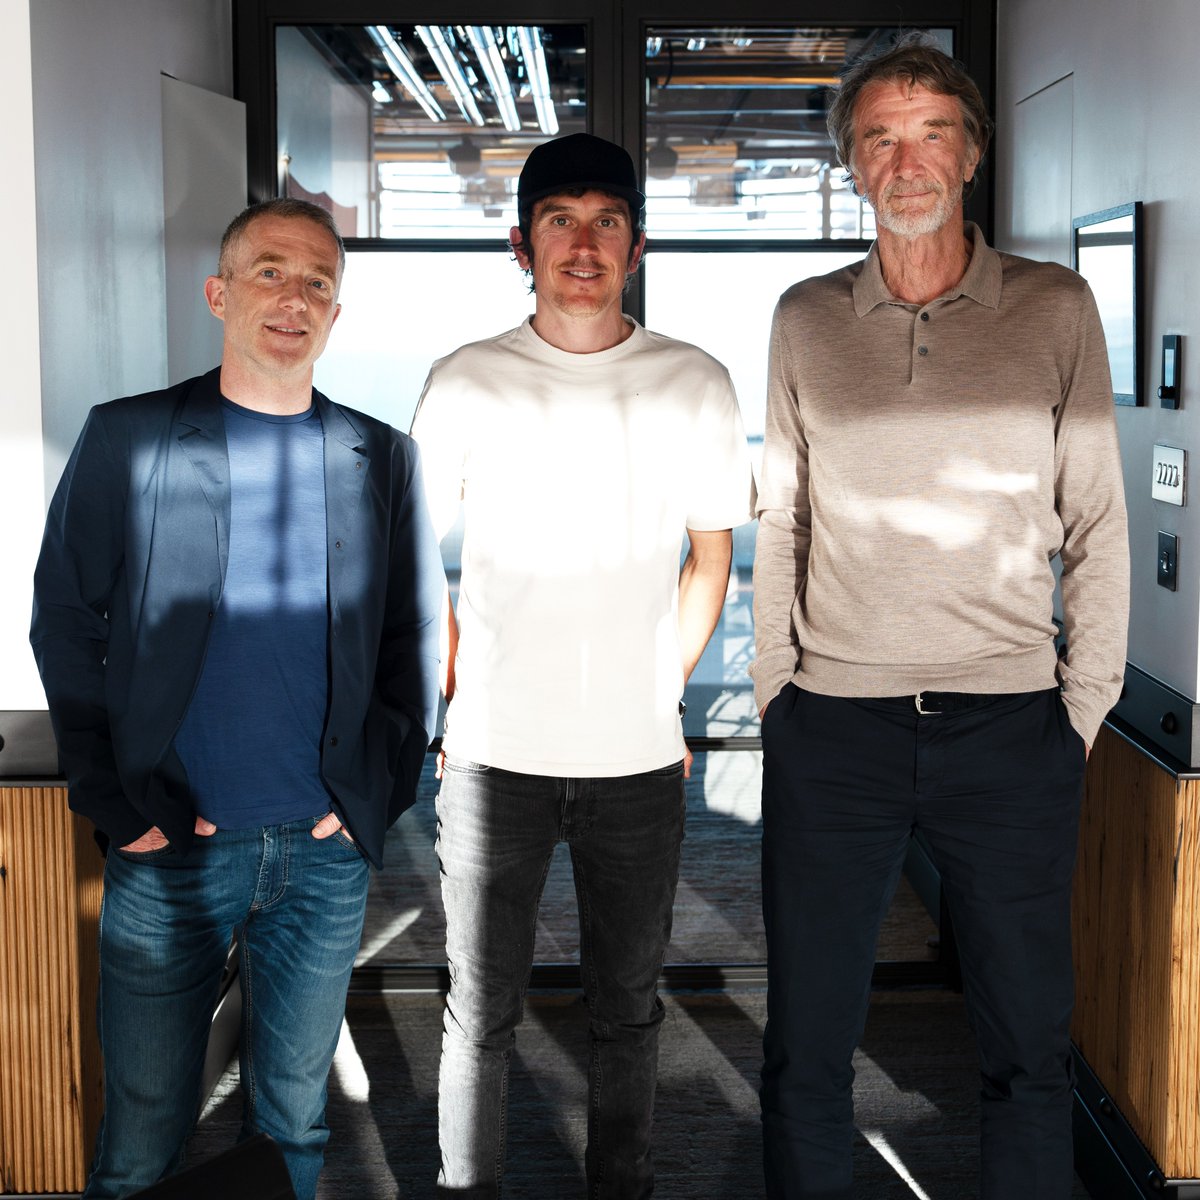 It’s a big one - tomorrow we welcome Sir Jim Ratcliffe to the GTCC! He’s G’s big boss, a huge cycling fan, the new part-owner of Manchester United and one of the most talked about men in sport right now. You won’t want to miss it 🎙️